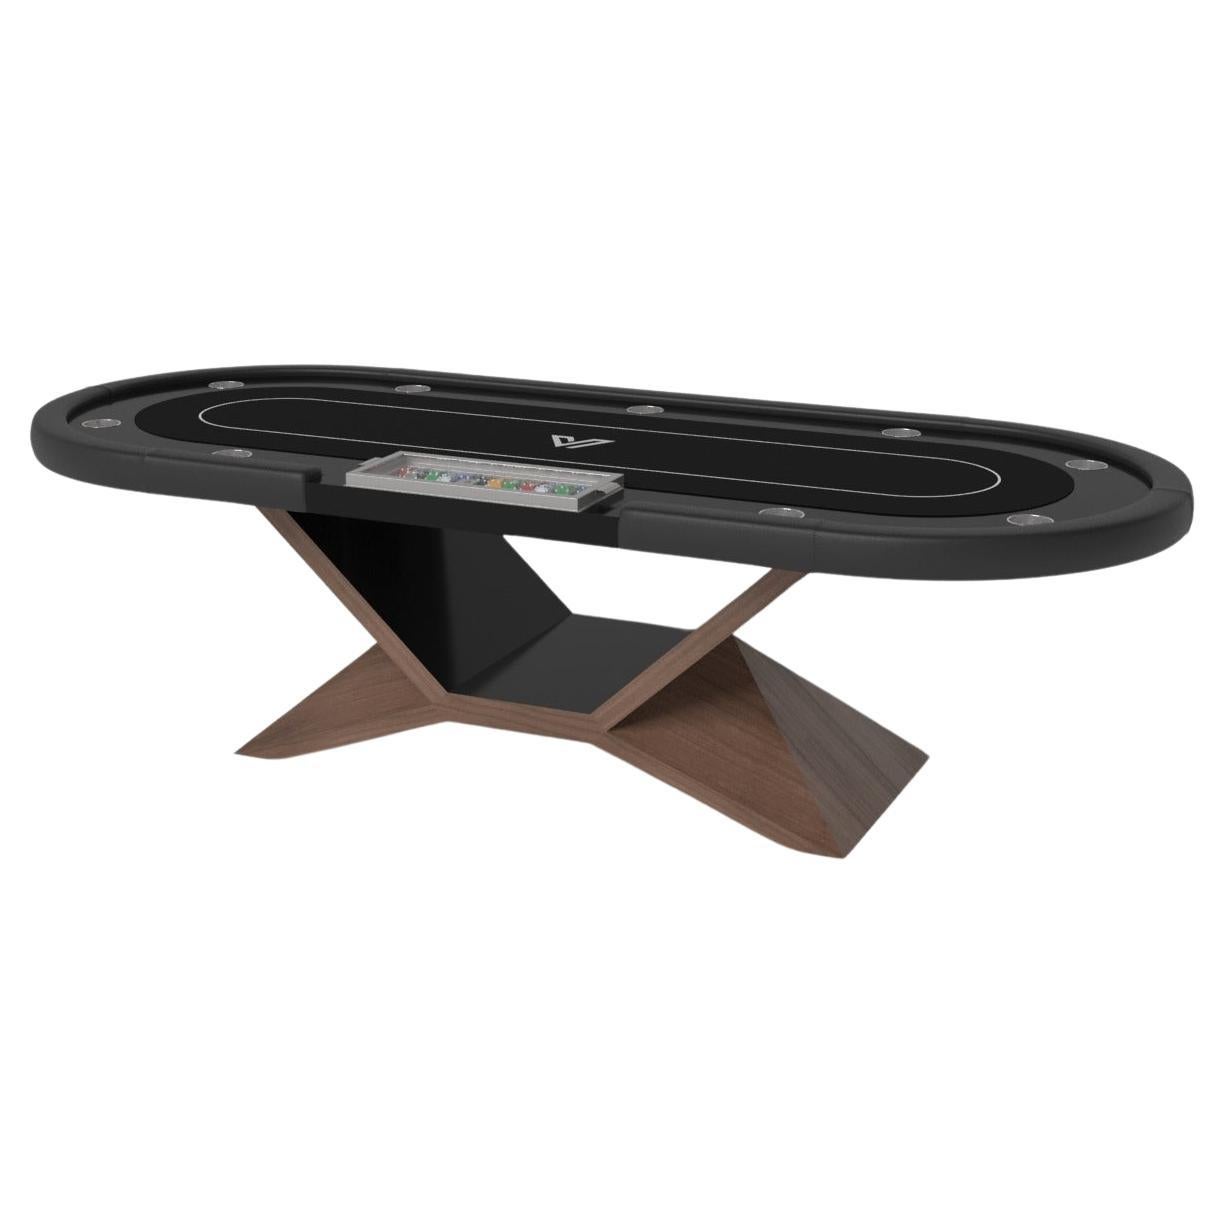 Elevate Customs Kors Poker Tables / Solid Walnut Wood in 8'8" - Made in USA For Sale